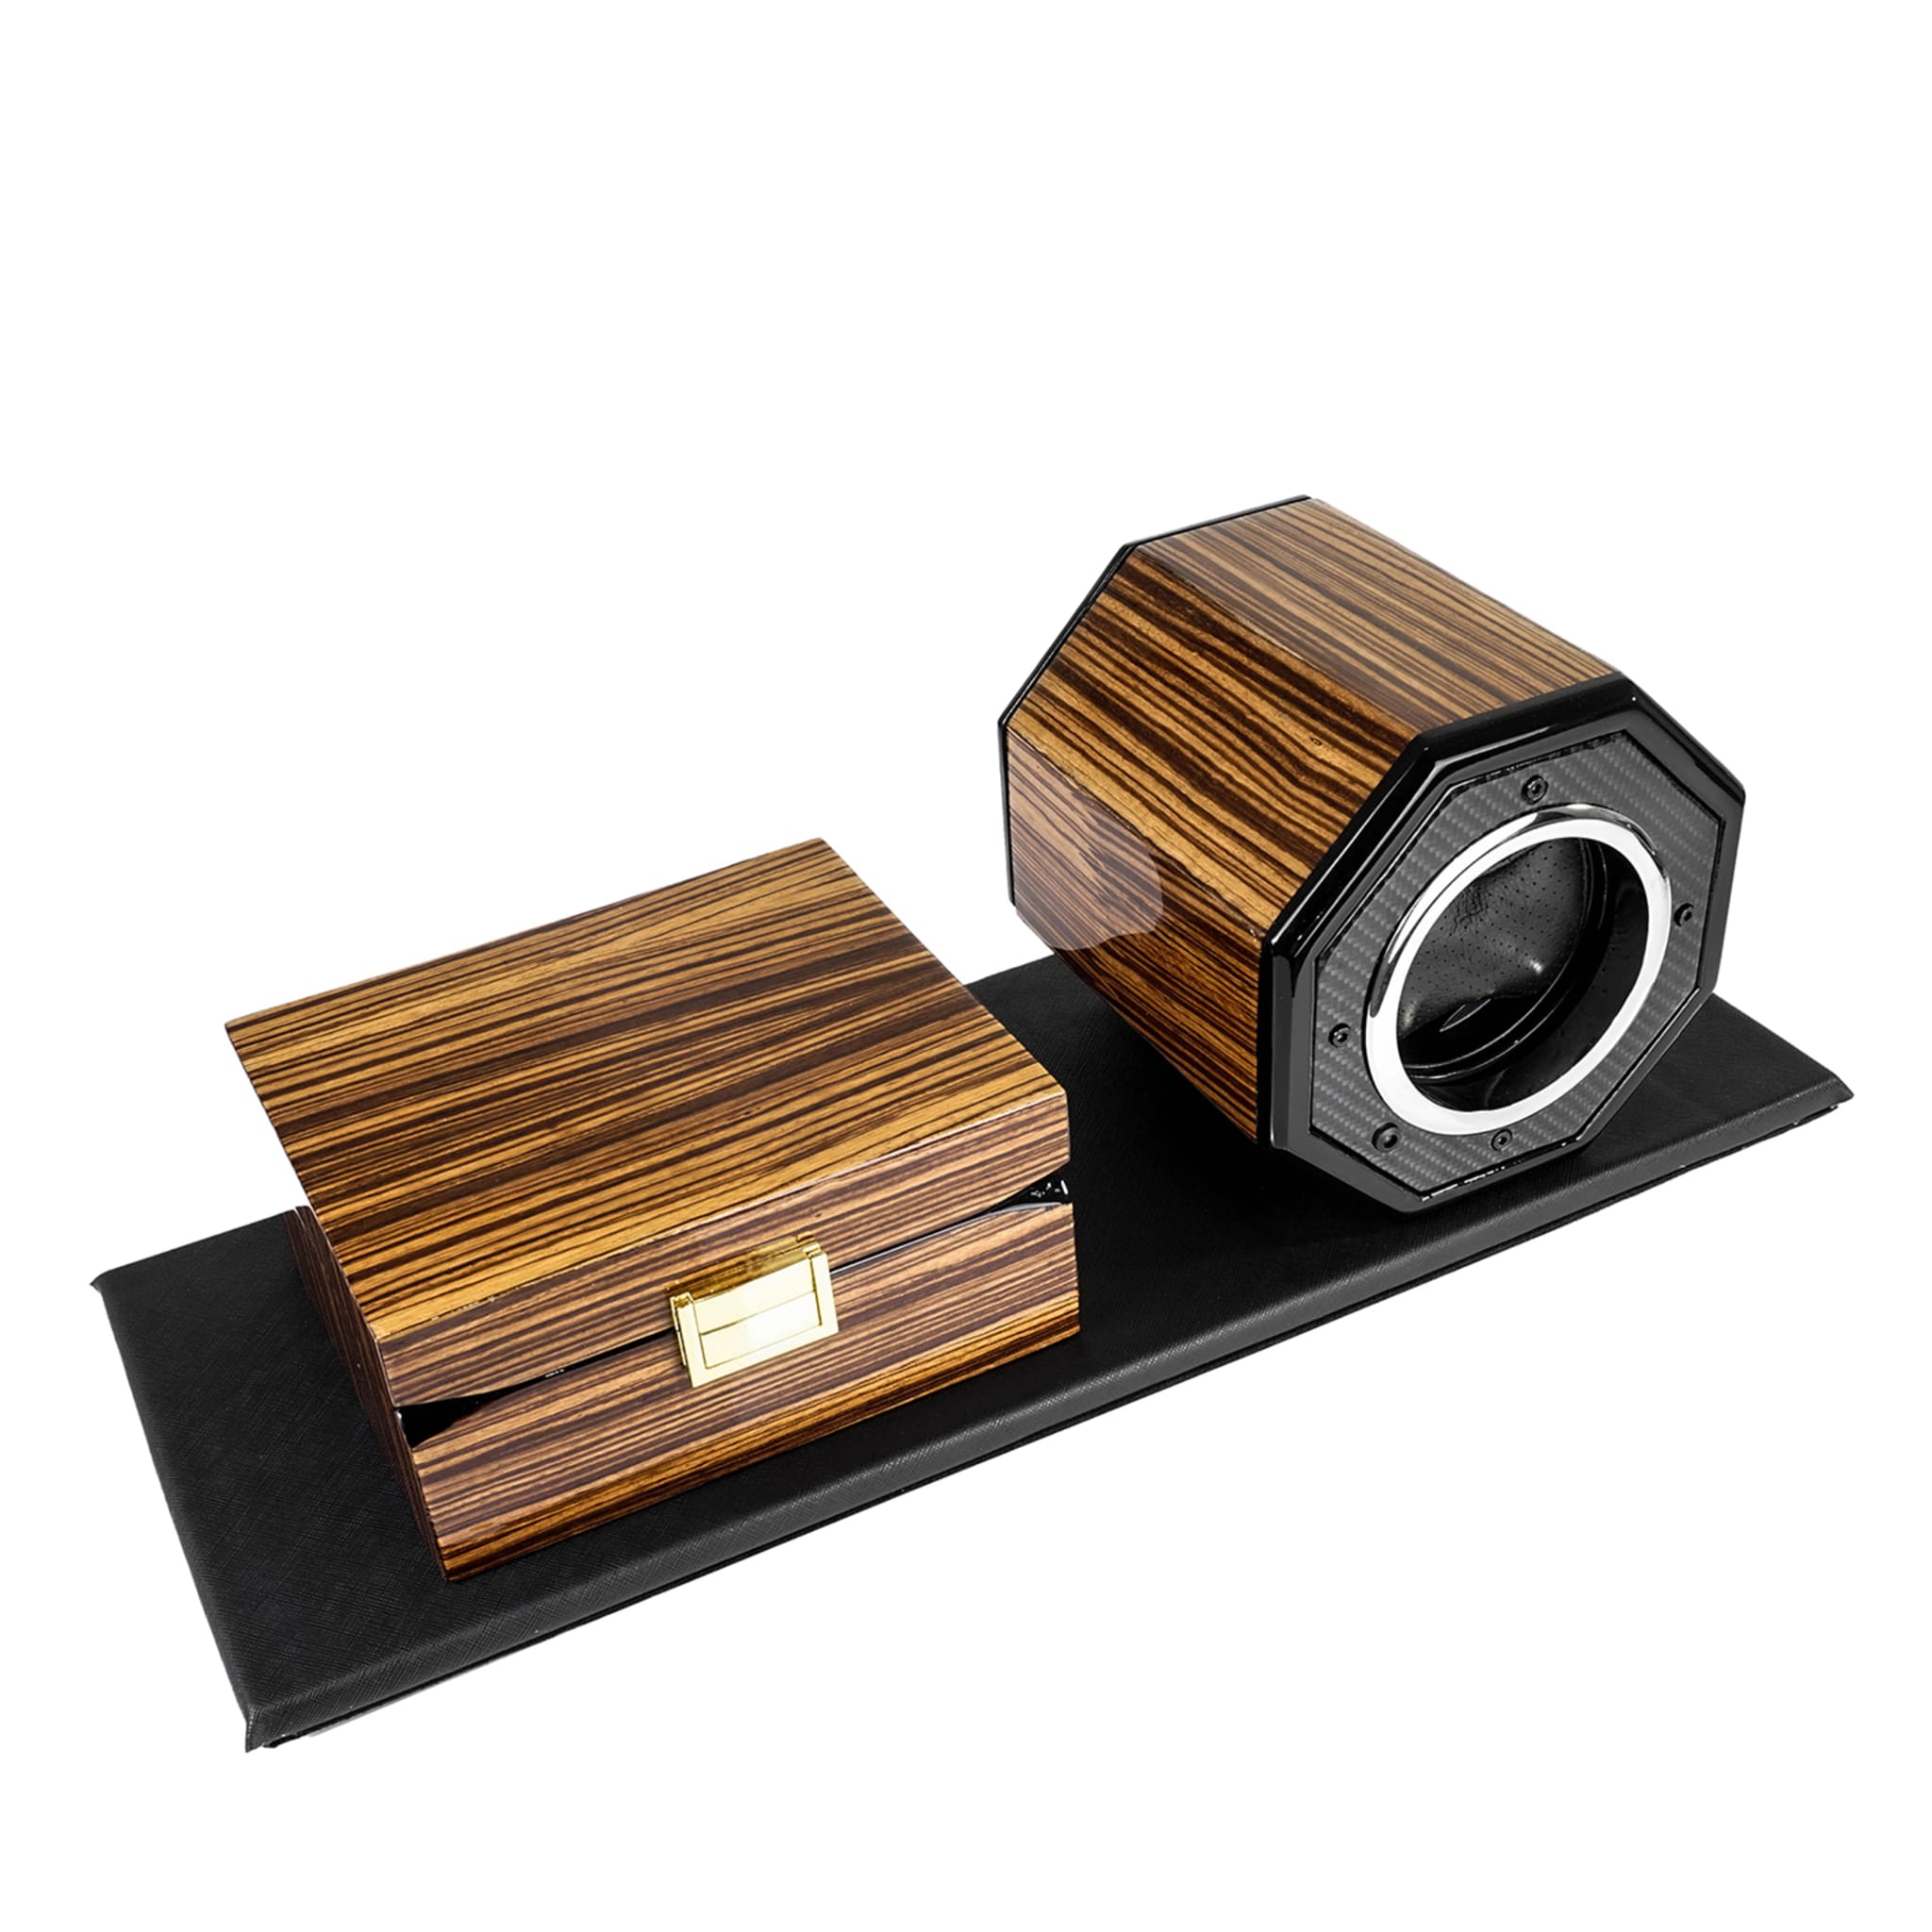 MT Real Carbon Fiber and Zebrano Wood Desk Watchbox #3 - Main view